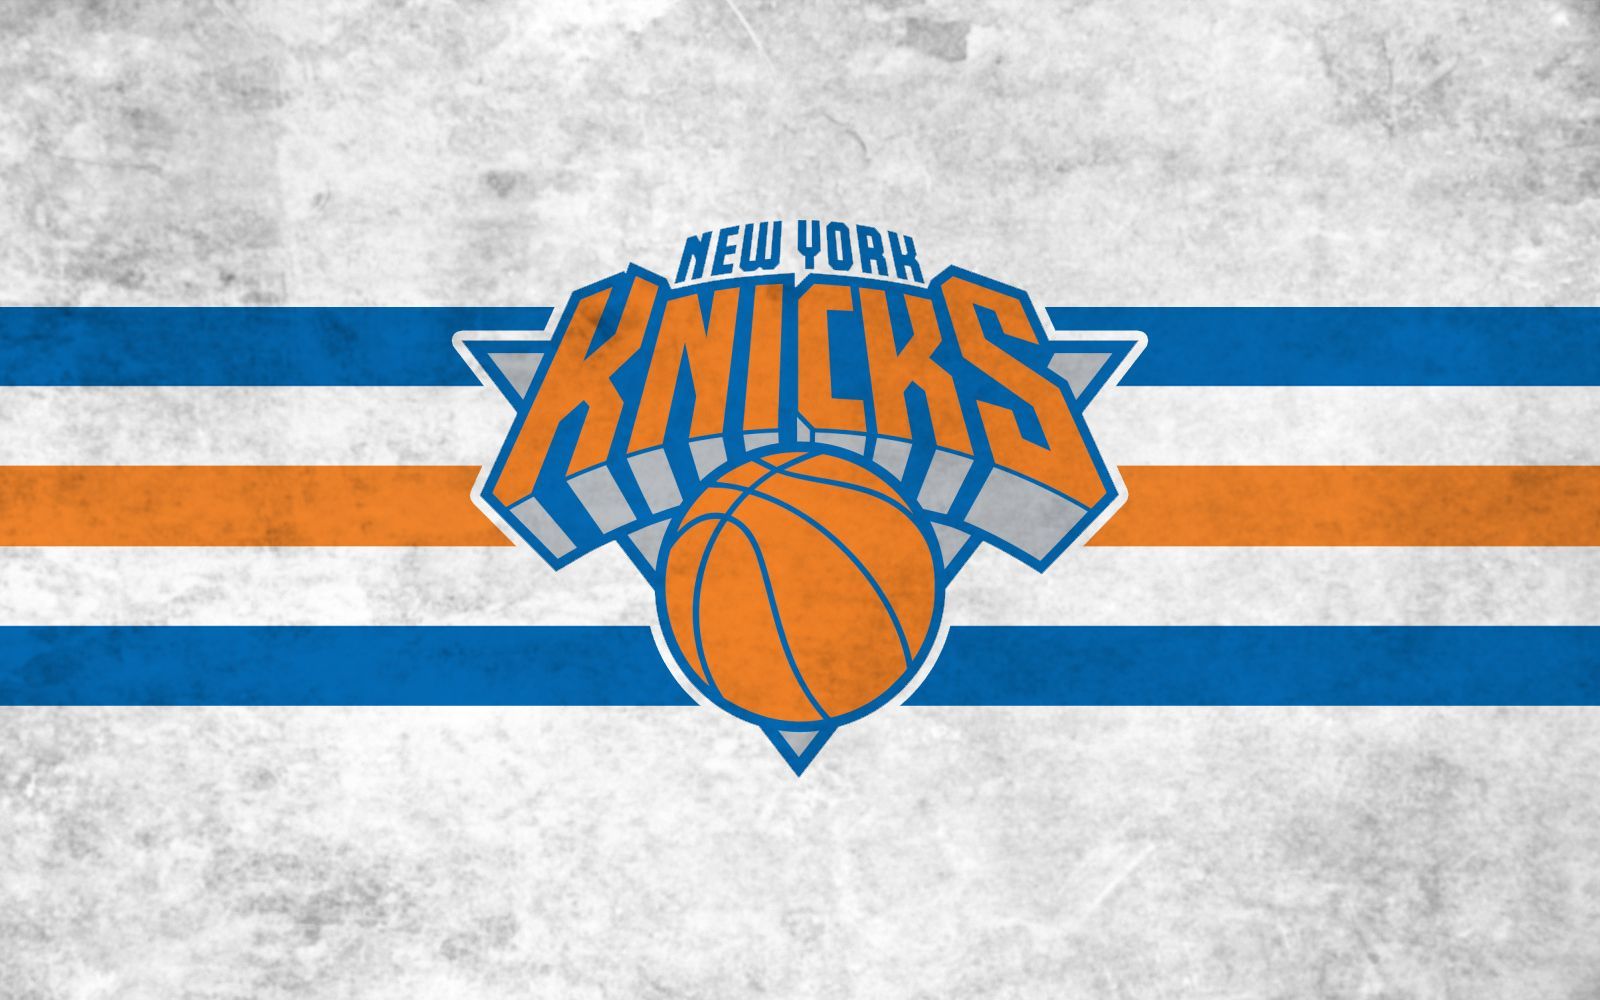 Free download Wallpaper Of New York Knicks In Fading Grey Background